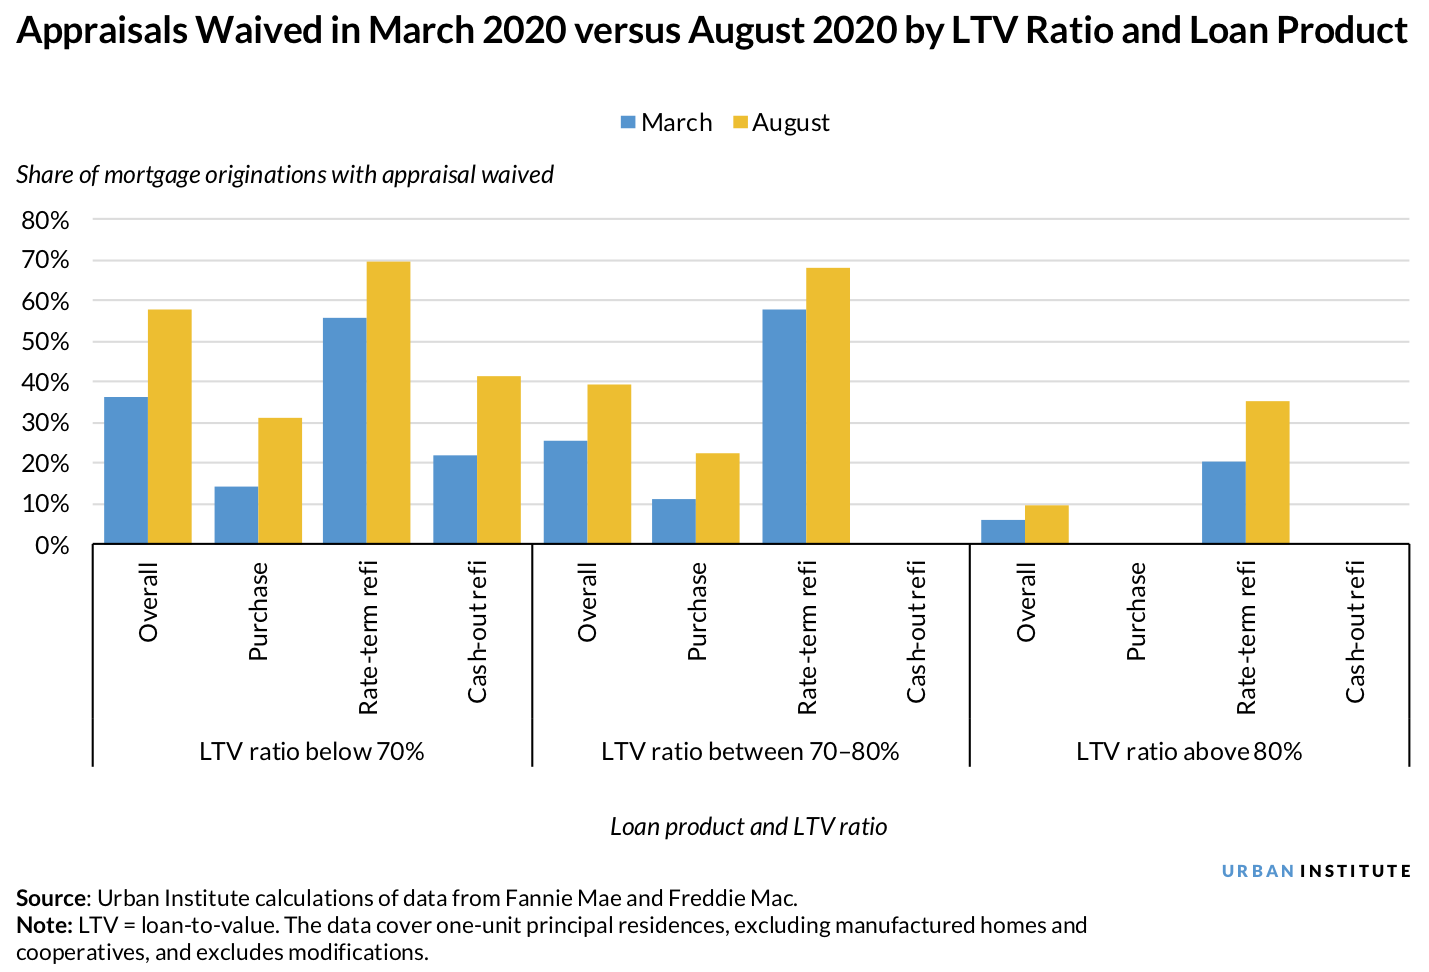 Appraisals waived in March 2020 vs. April 2020 by LTV ratio